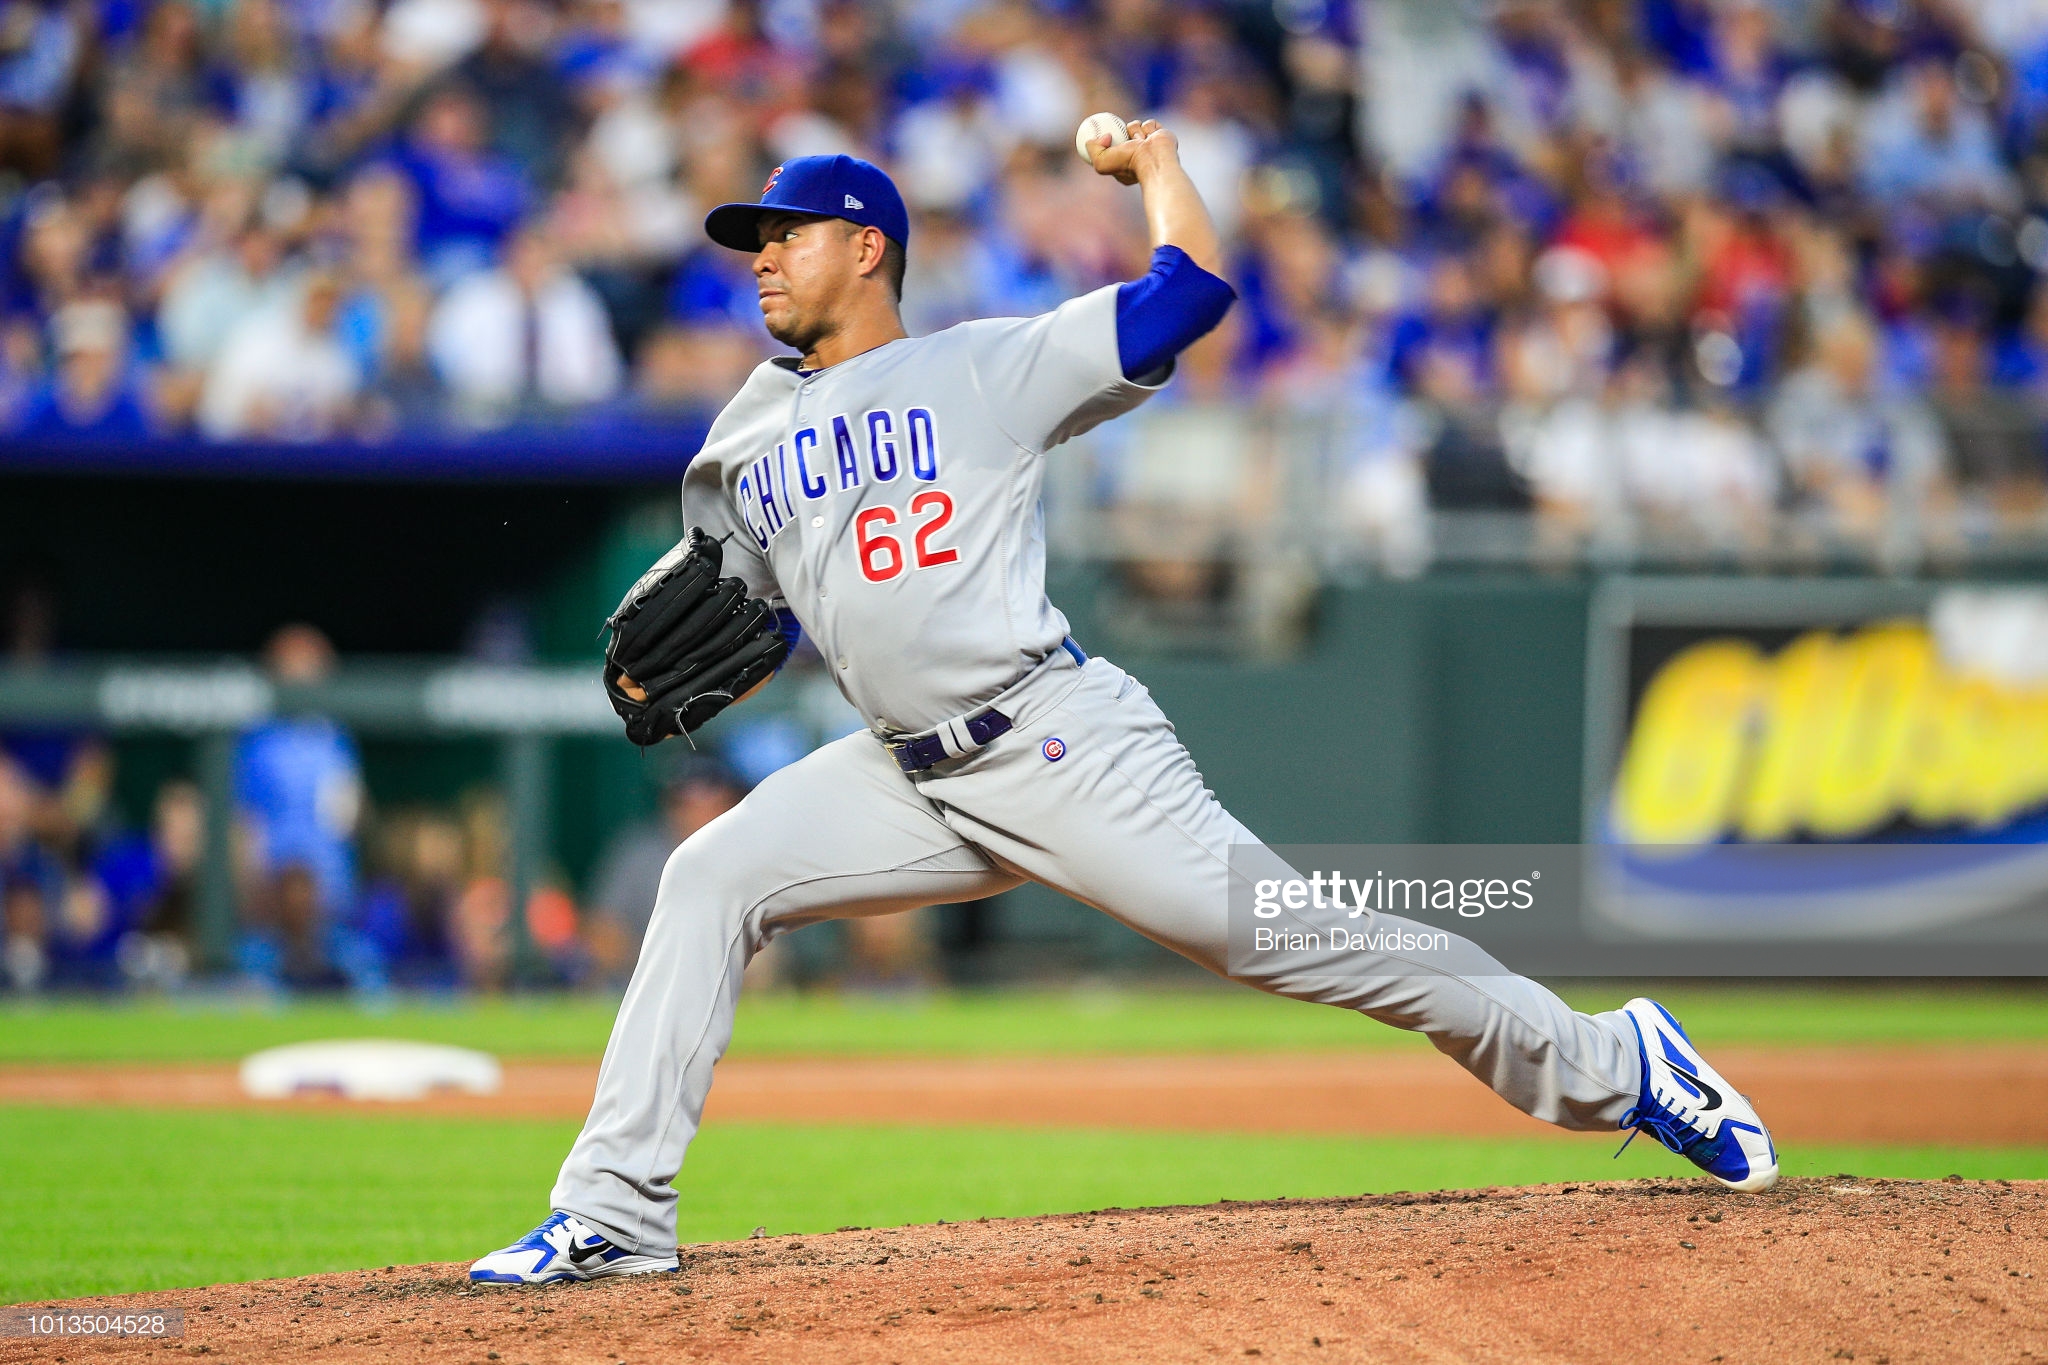 KANSAS CITY, MO - AUGUST 8: Jose Quintana #62 of the Chicago Cubs pitches against the Kansas City Royals during the third inning at Kauffman Stadium on August 8, 2018 in Kansas City, Missouri. (Photo by Brian Davidson/Getty Images)